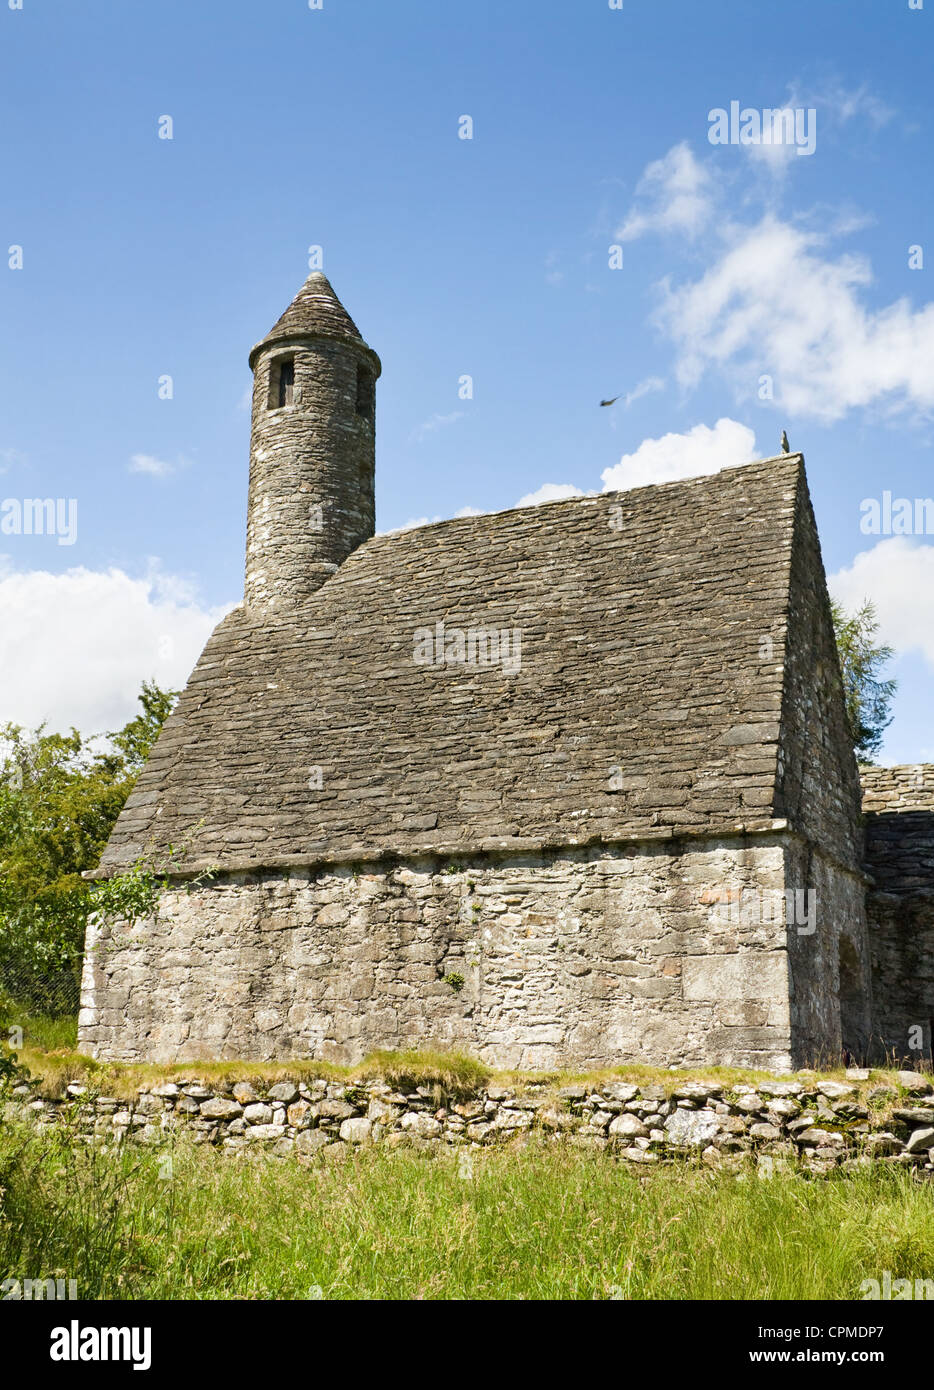 Symbol of Ireland - Saint Kevin's Church (Kitchen) at Glendalough National Heritage Center in Wicklow Mountains. Stock Photo